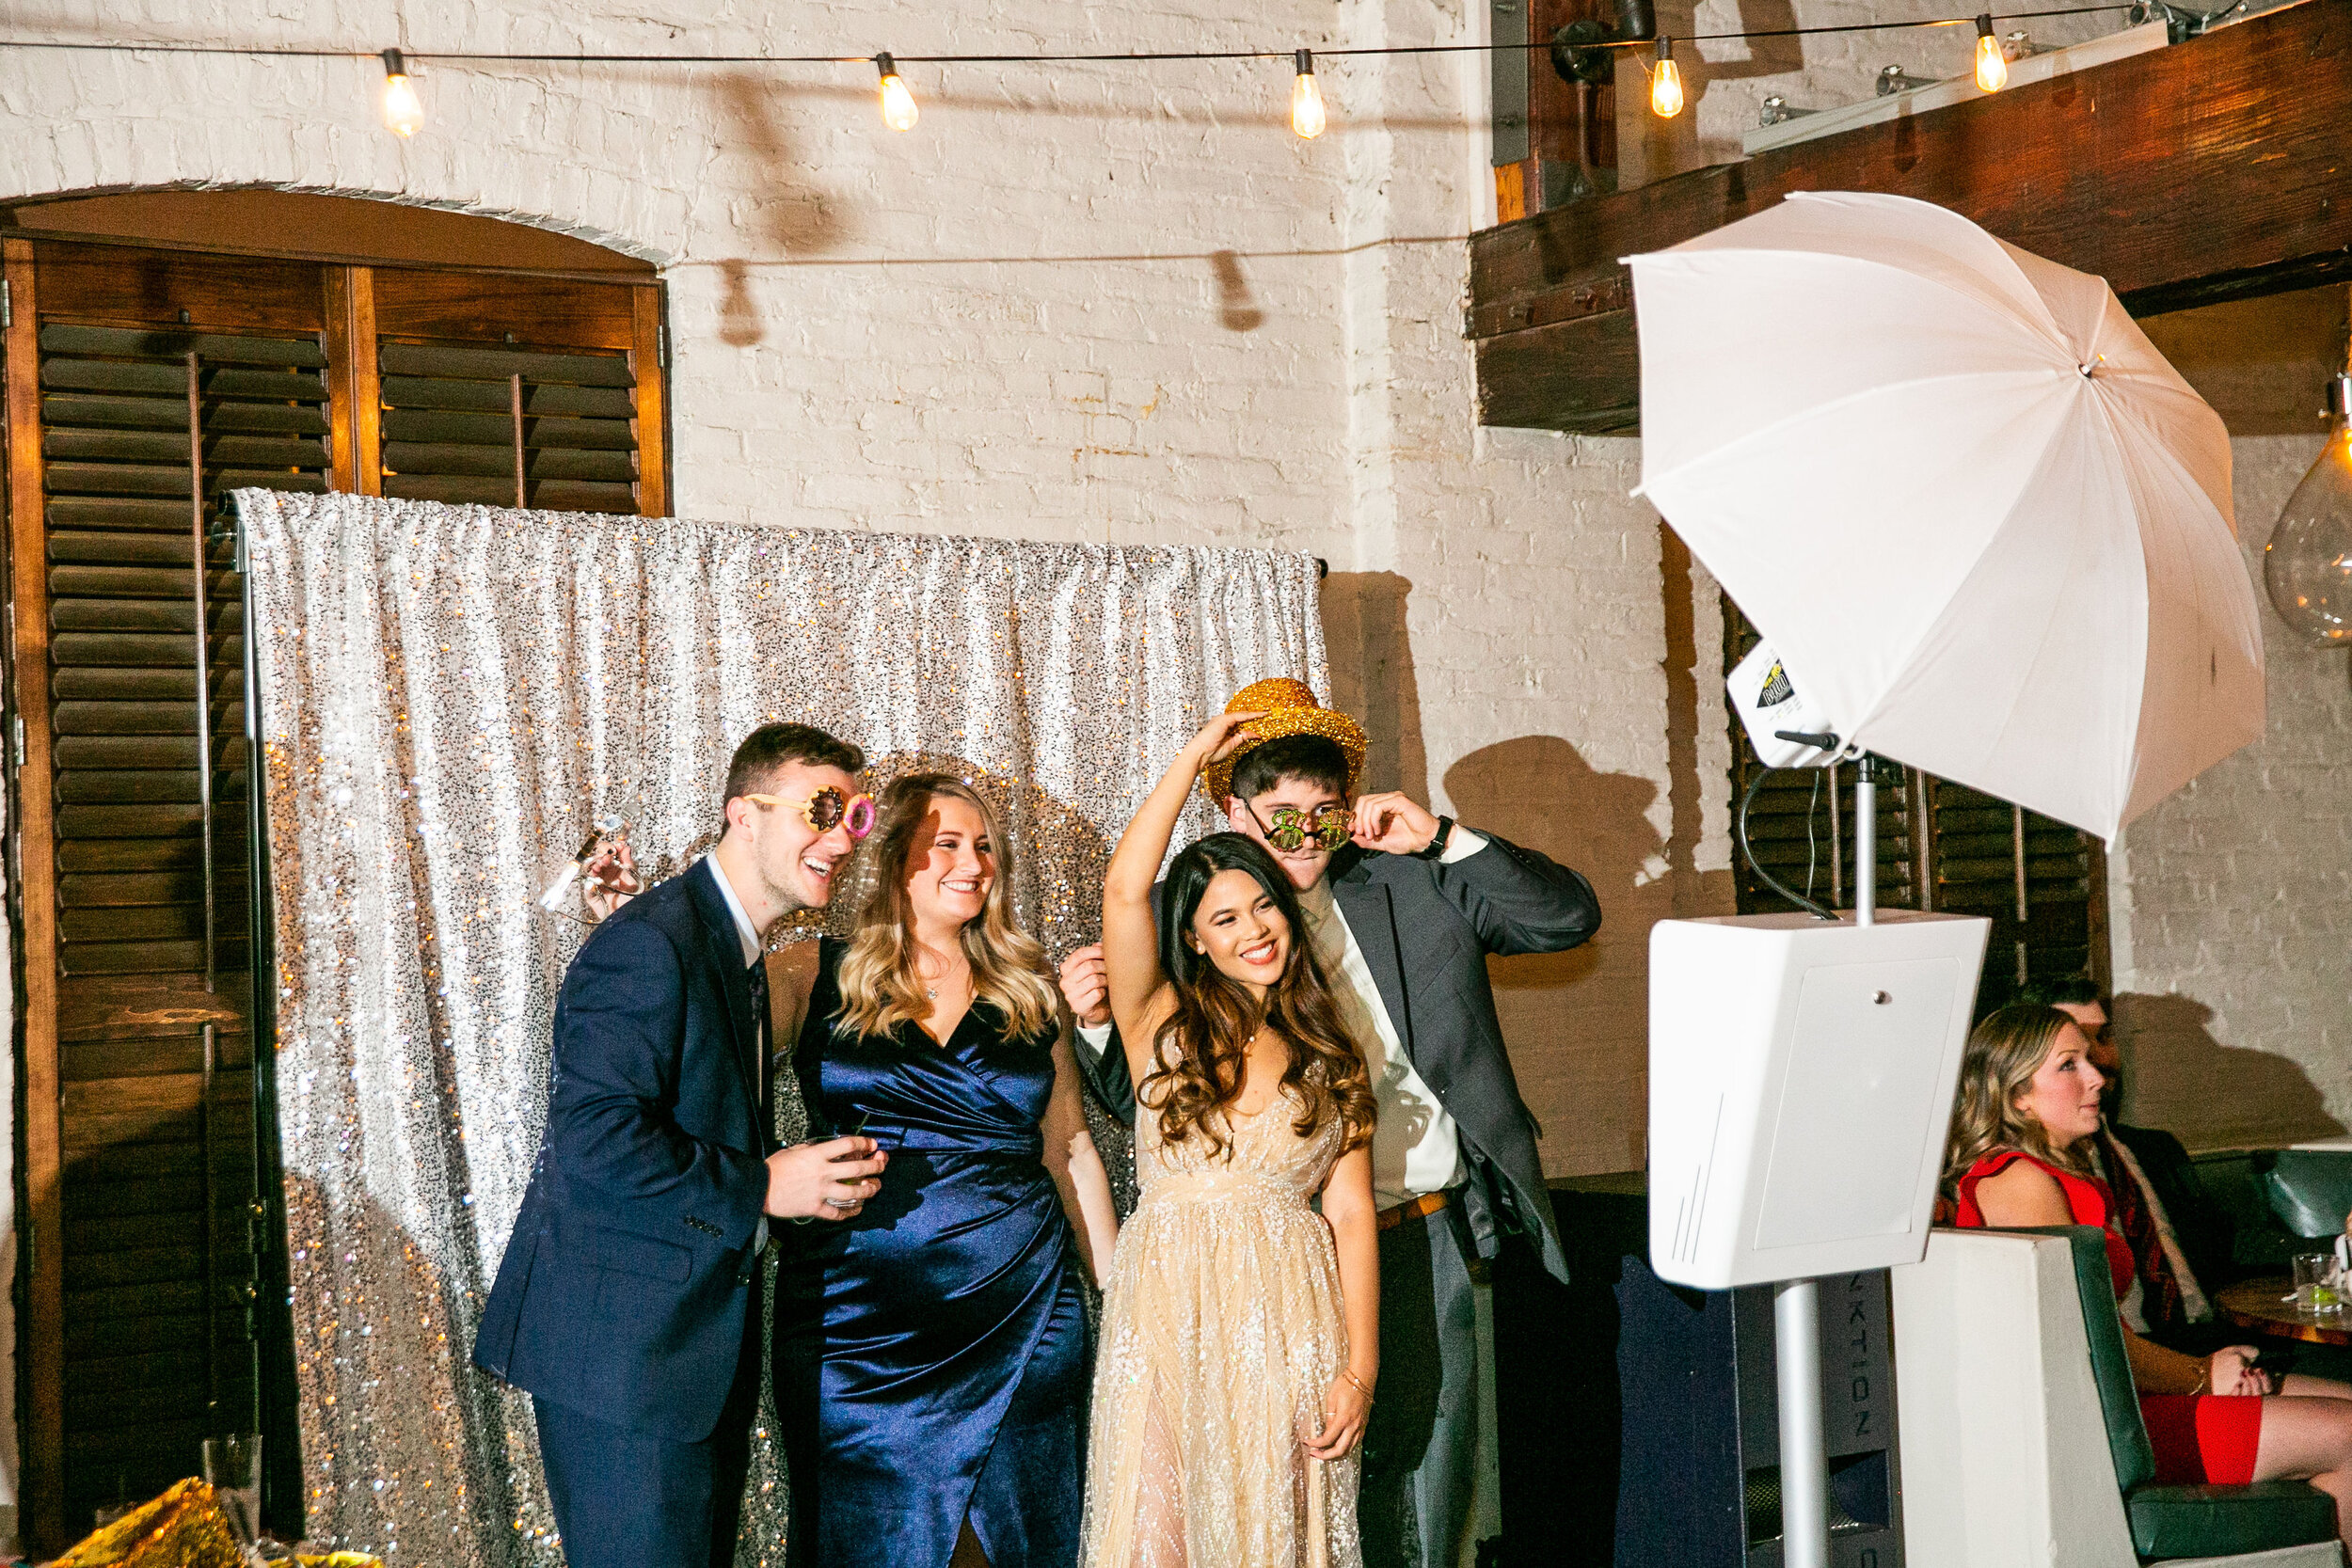 Photo Booth Rentals & Permanent Installations for Parties, Weddings & More